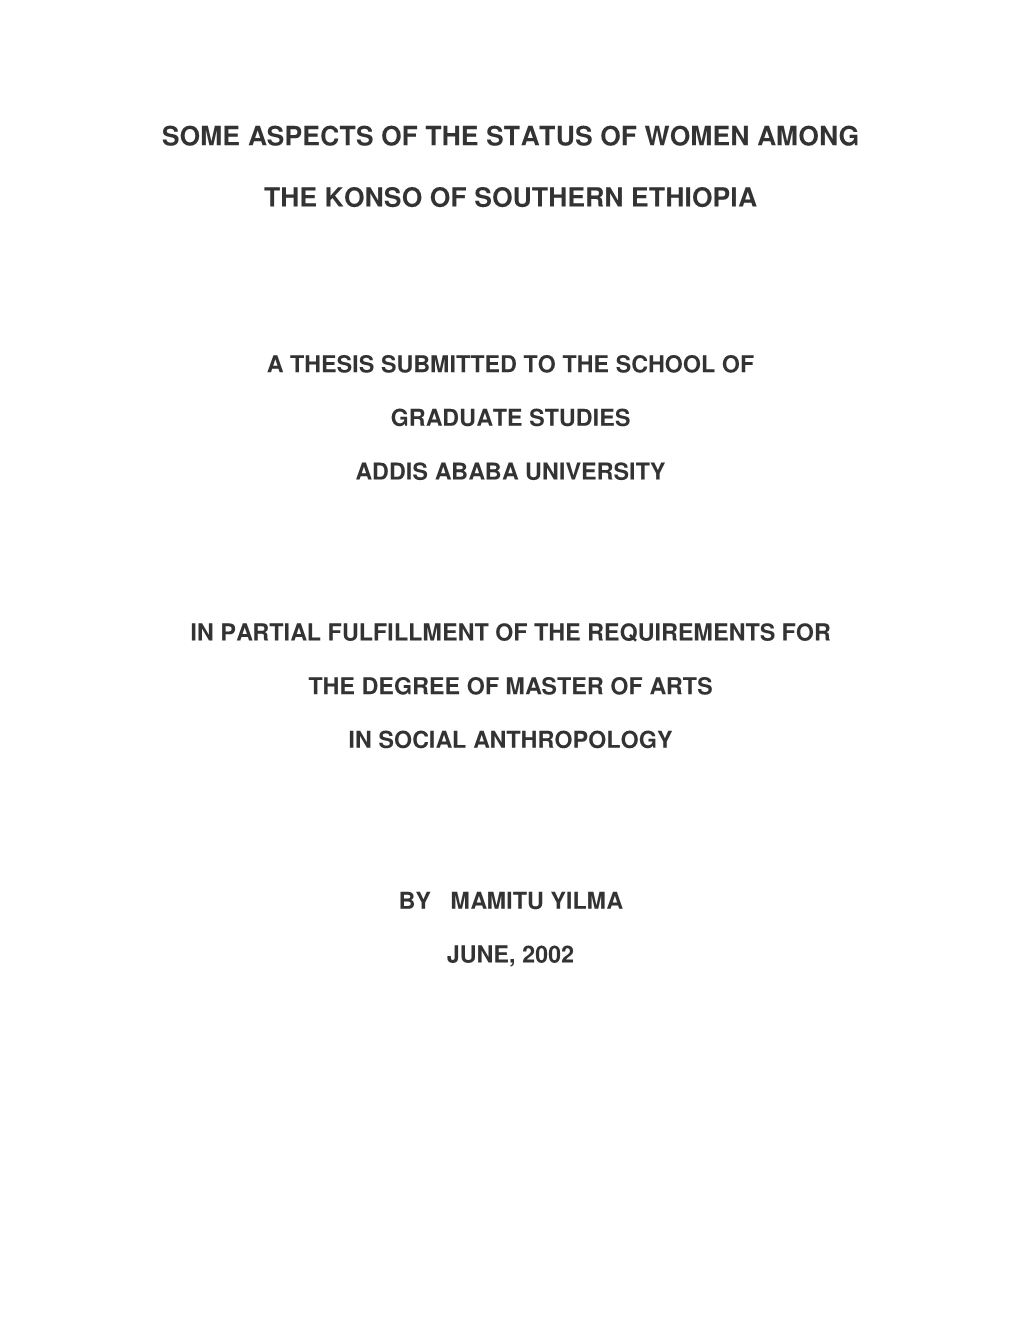 Some Aspects of the Status of Women Among the Konso Of